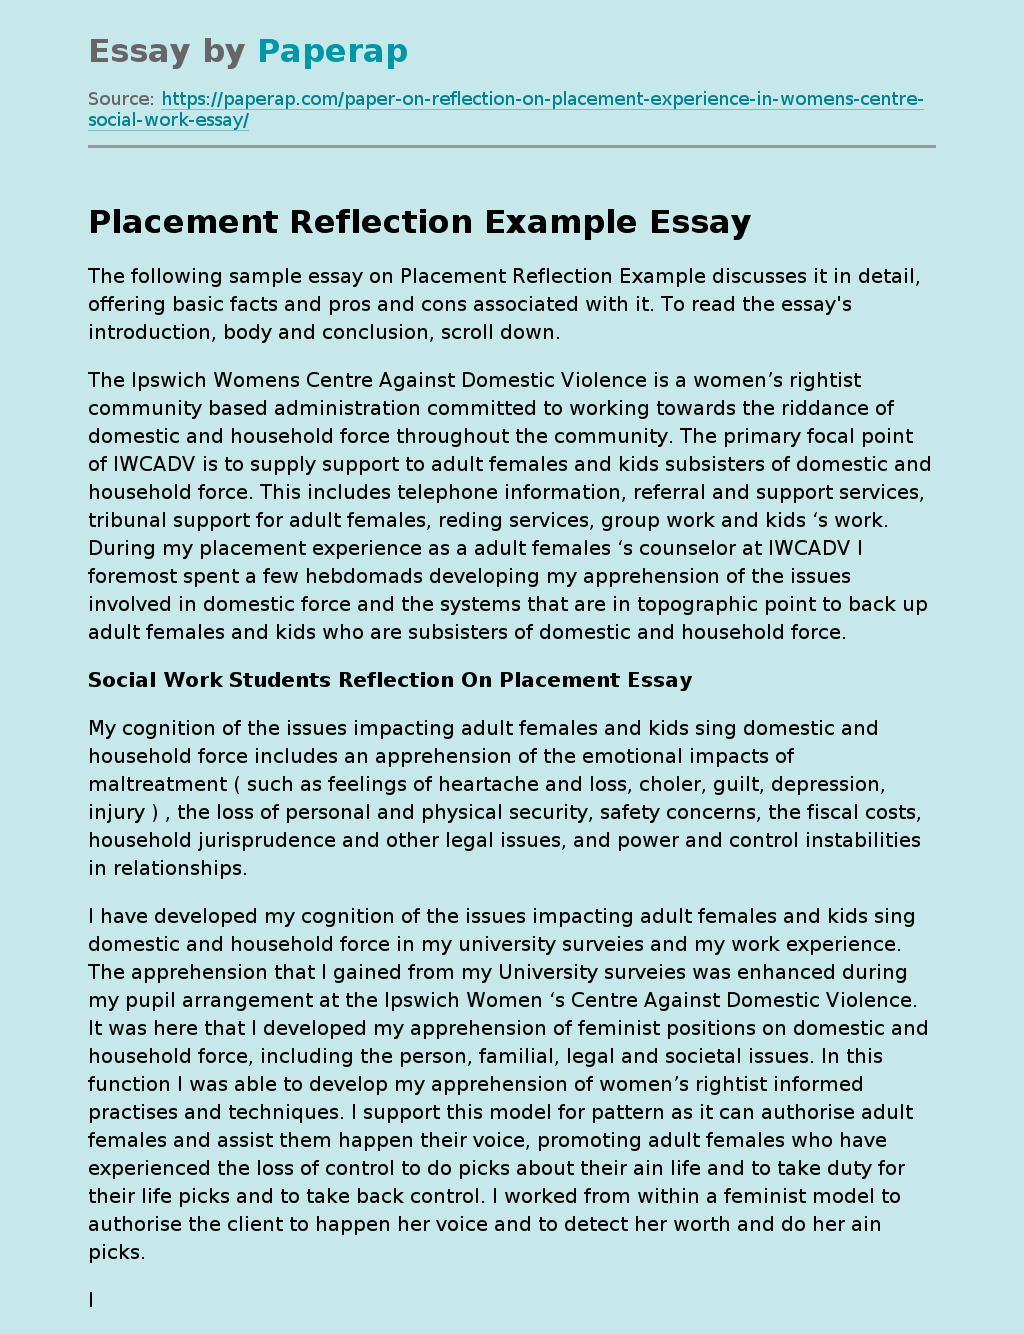 Placement Reflection Example